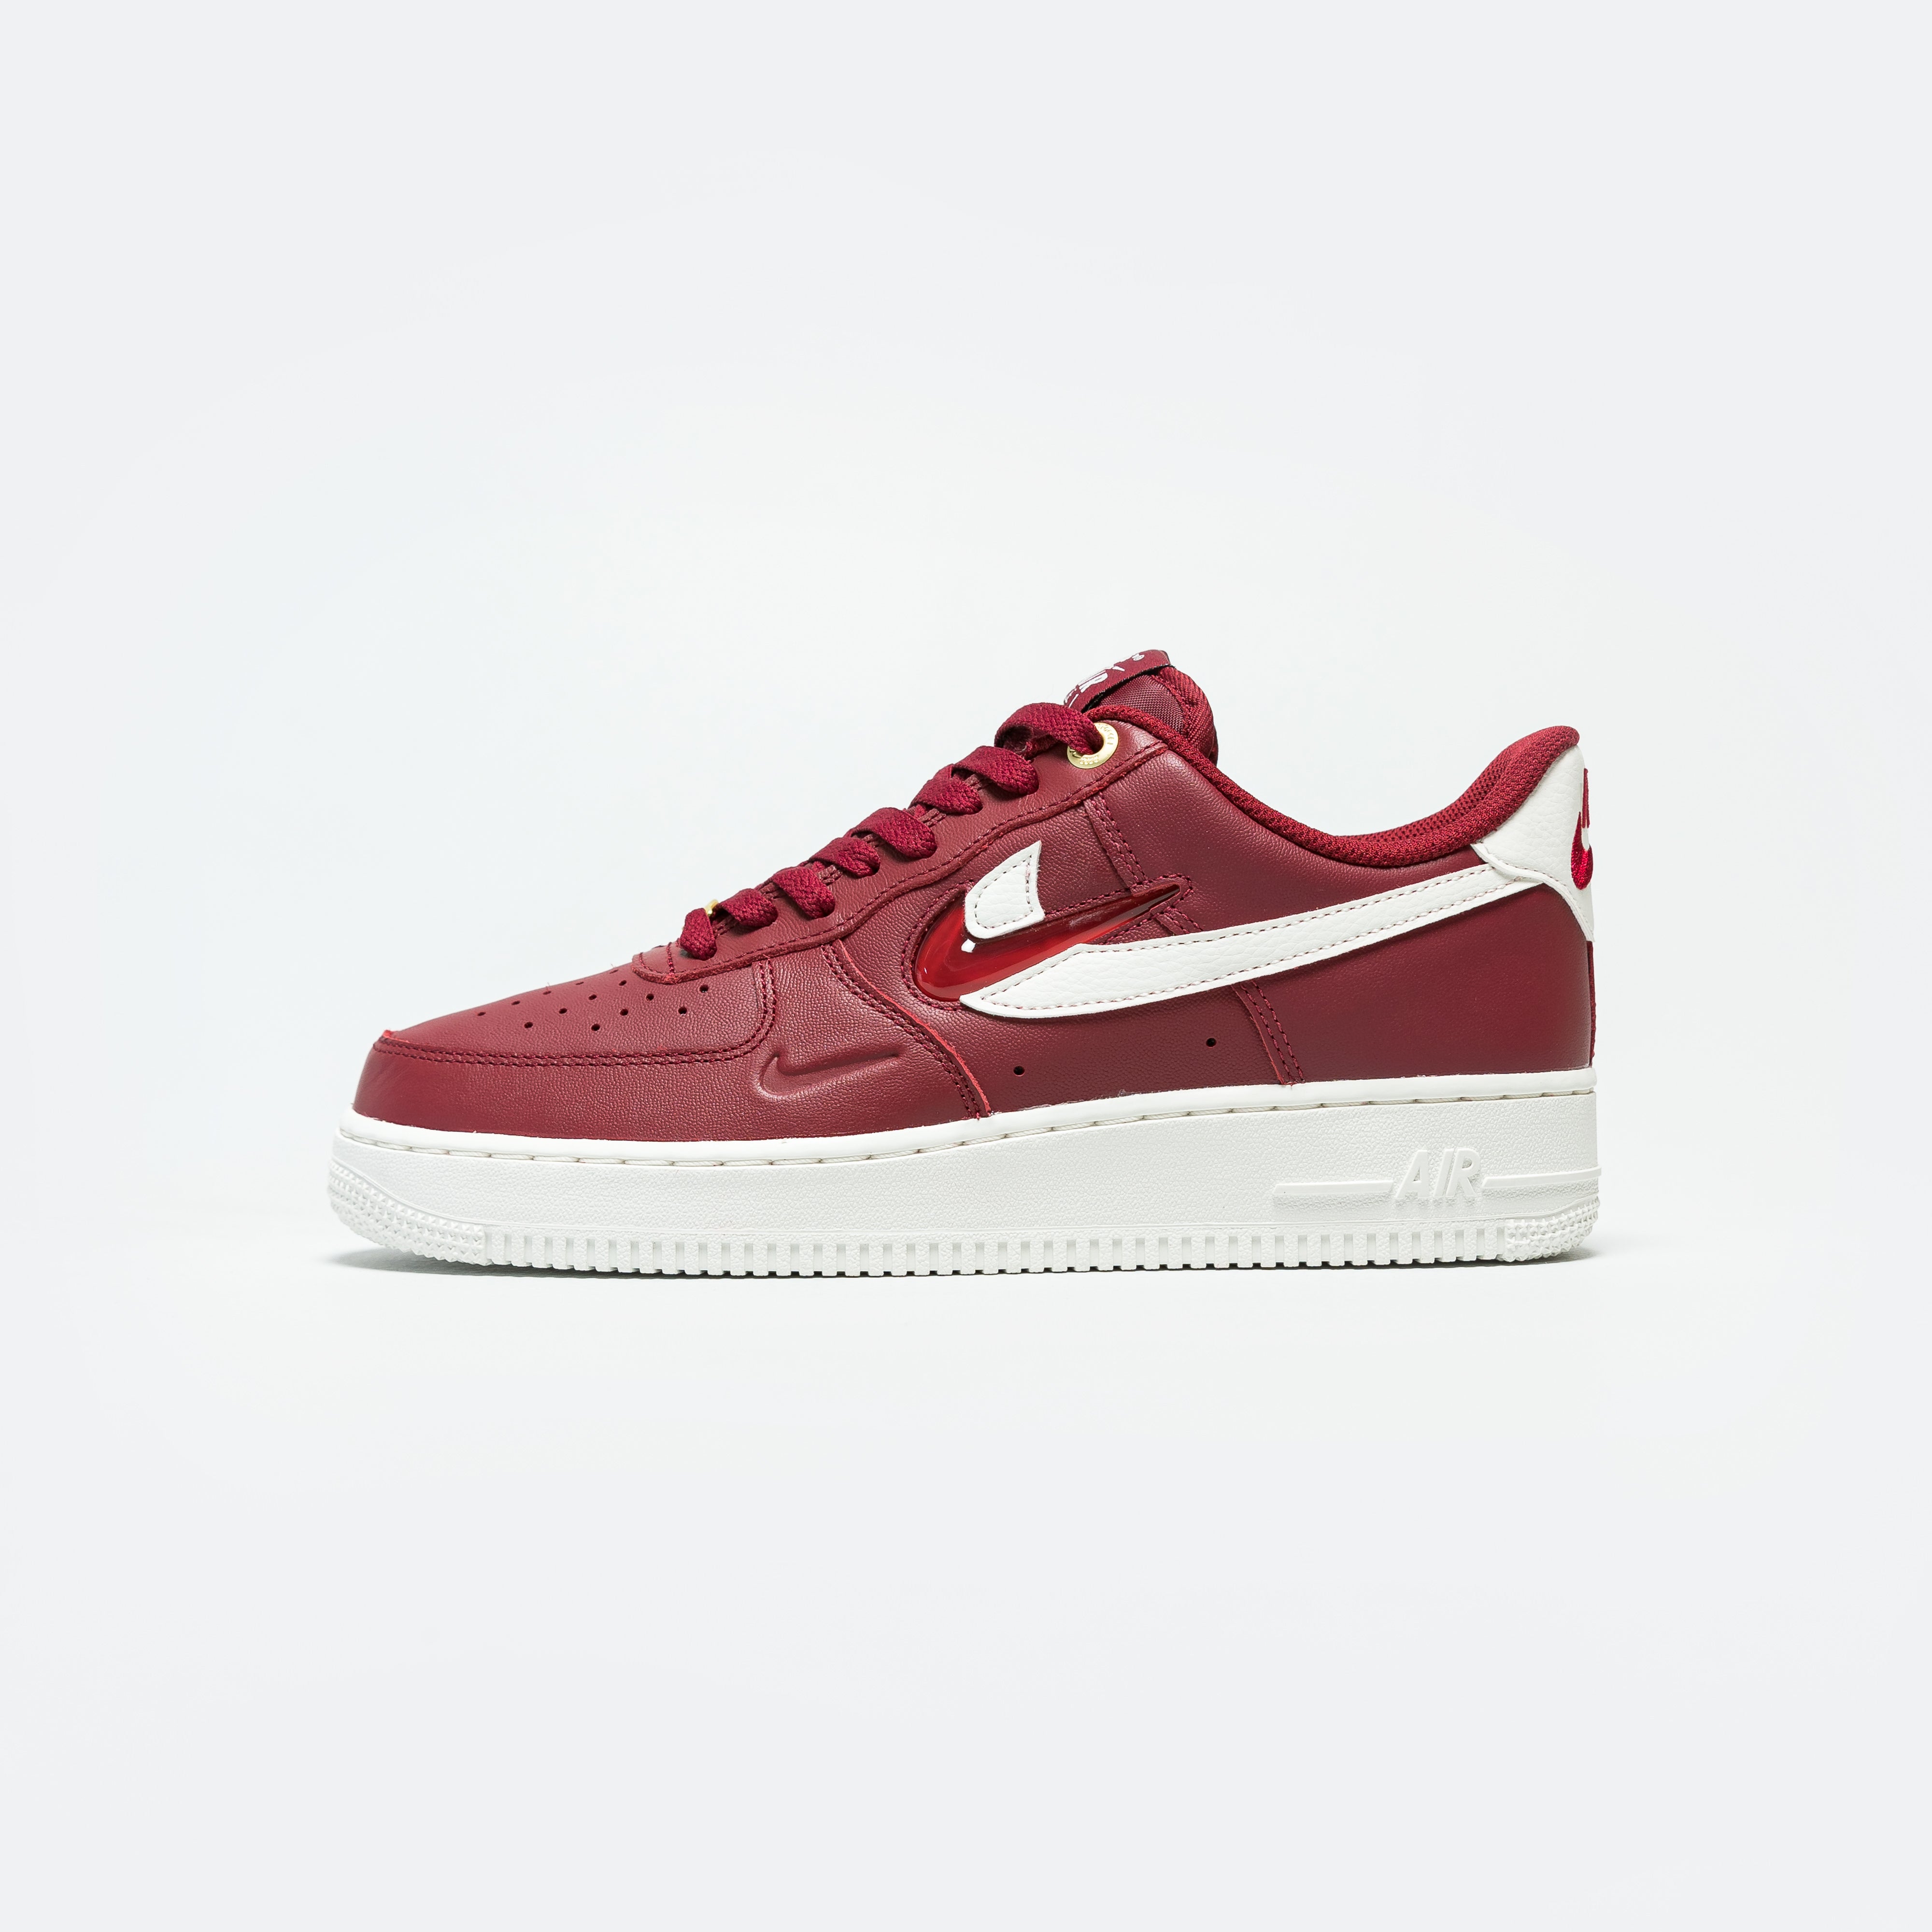 Juventud Seguro Para buscar refugio Nike Air Force 1 '07 PRM - Team Red/Sail/Gym Red | Up There